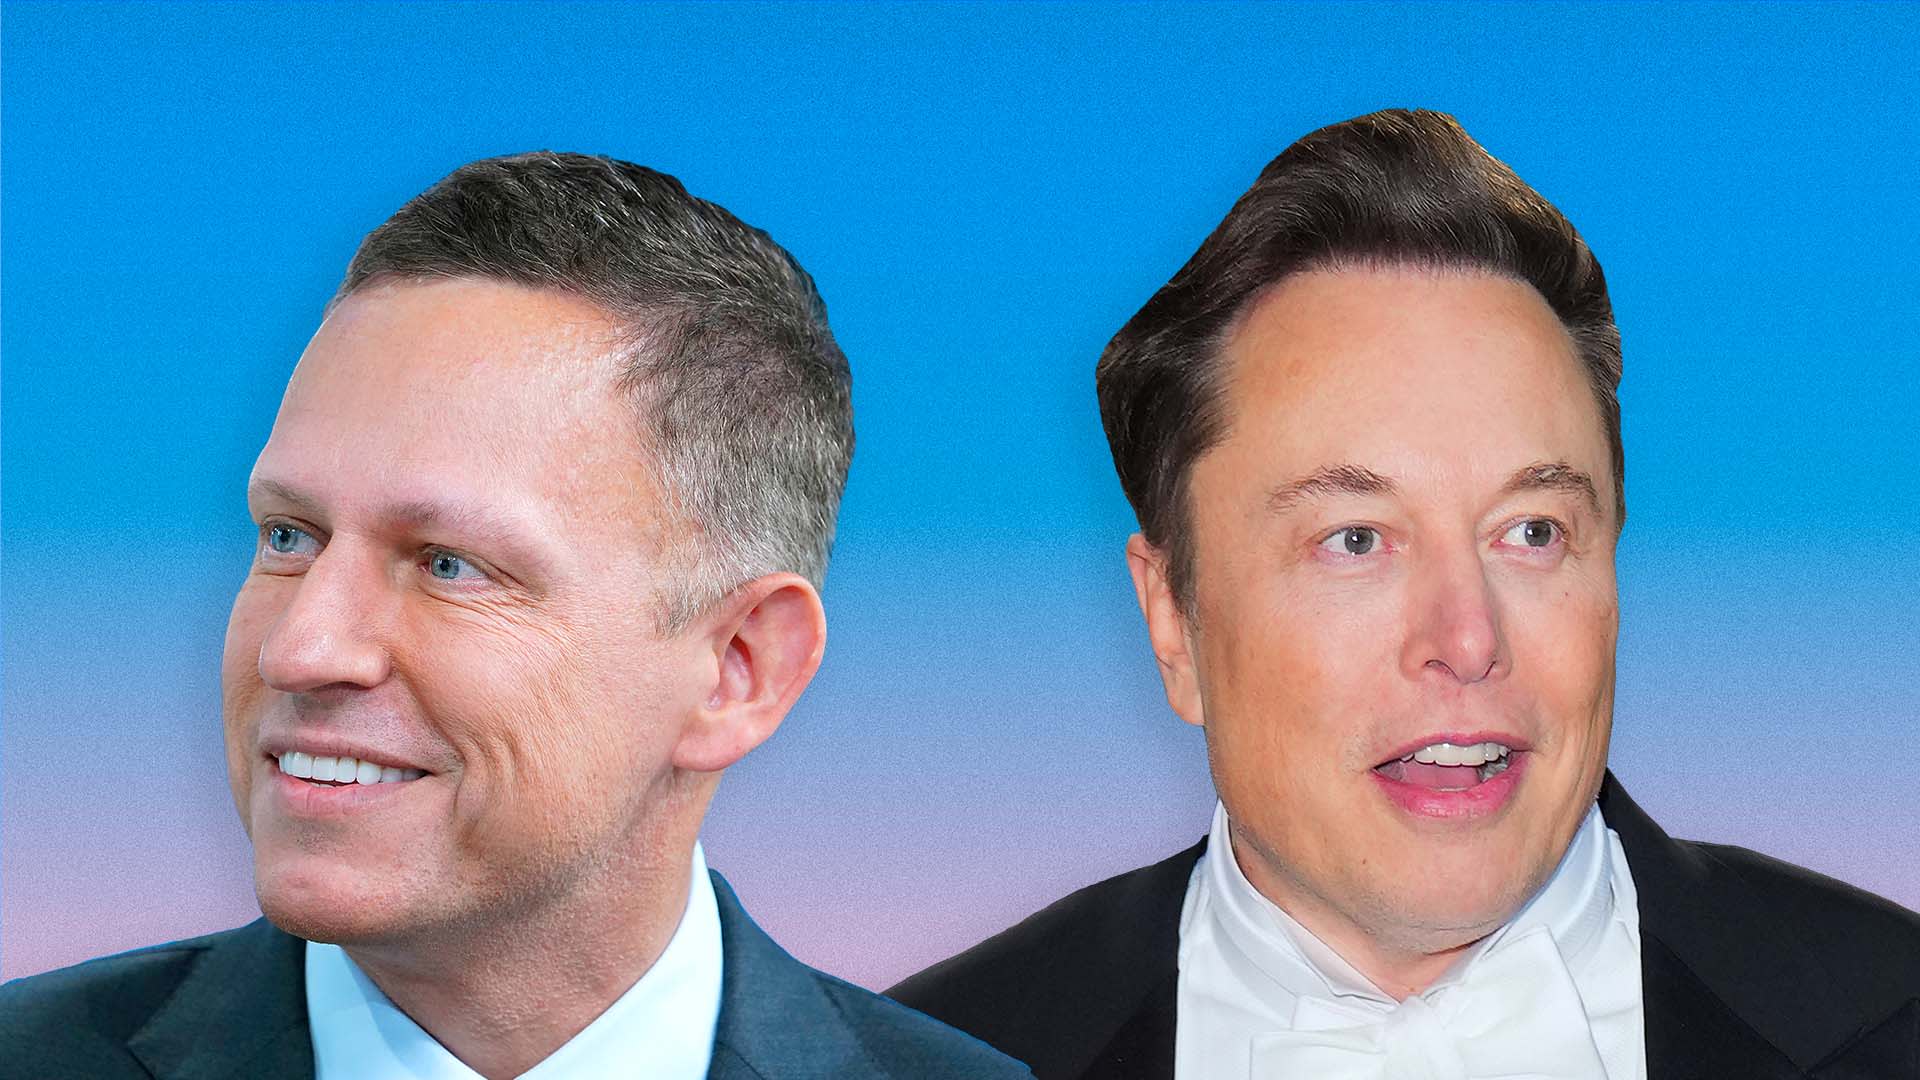 The Counterintuitive Secret to a Wildly Successful Career From Peter Thiel and Elon Musk